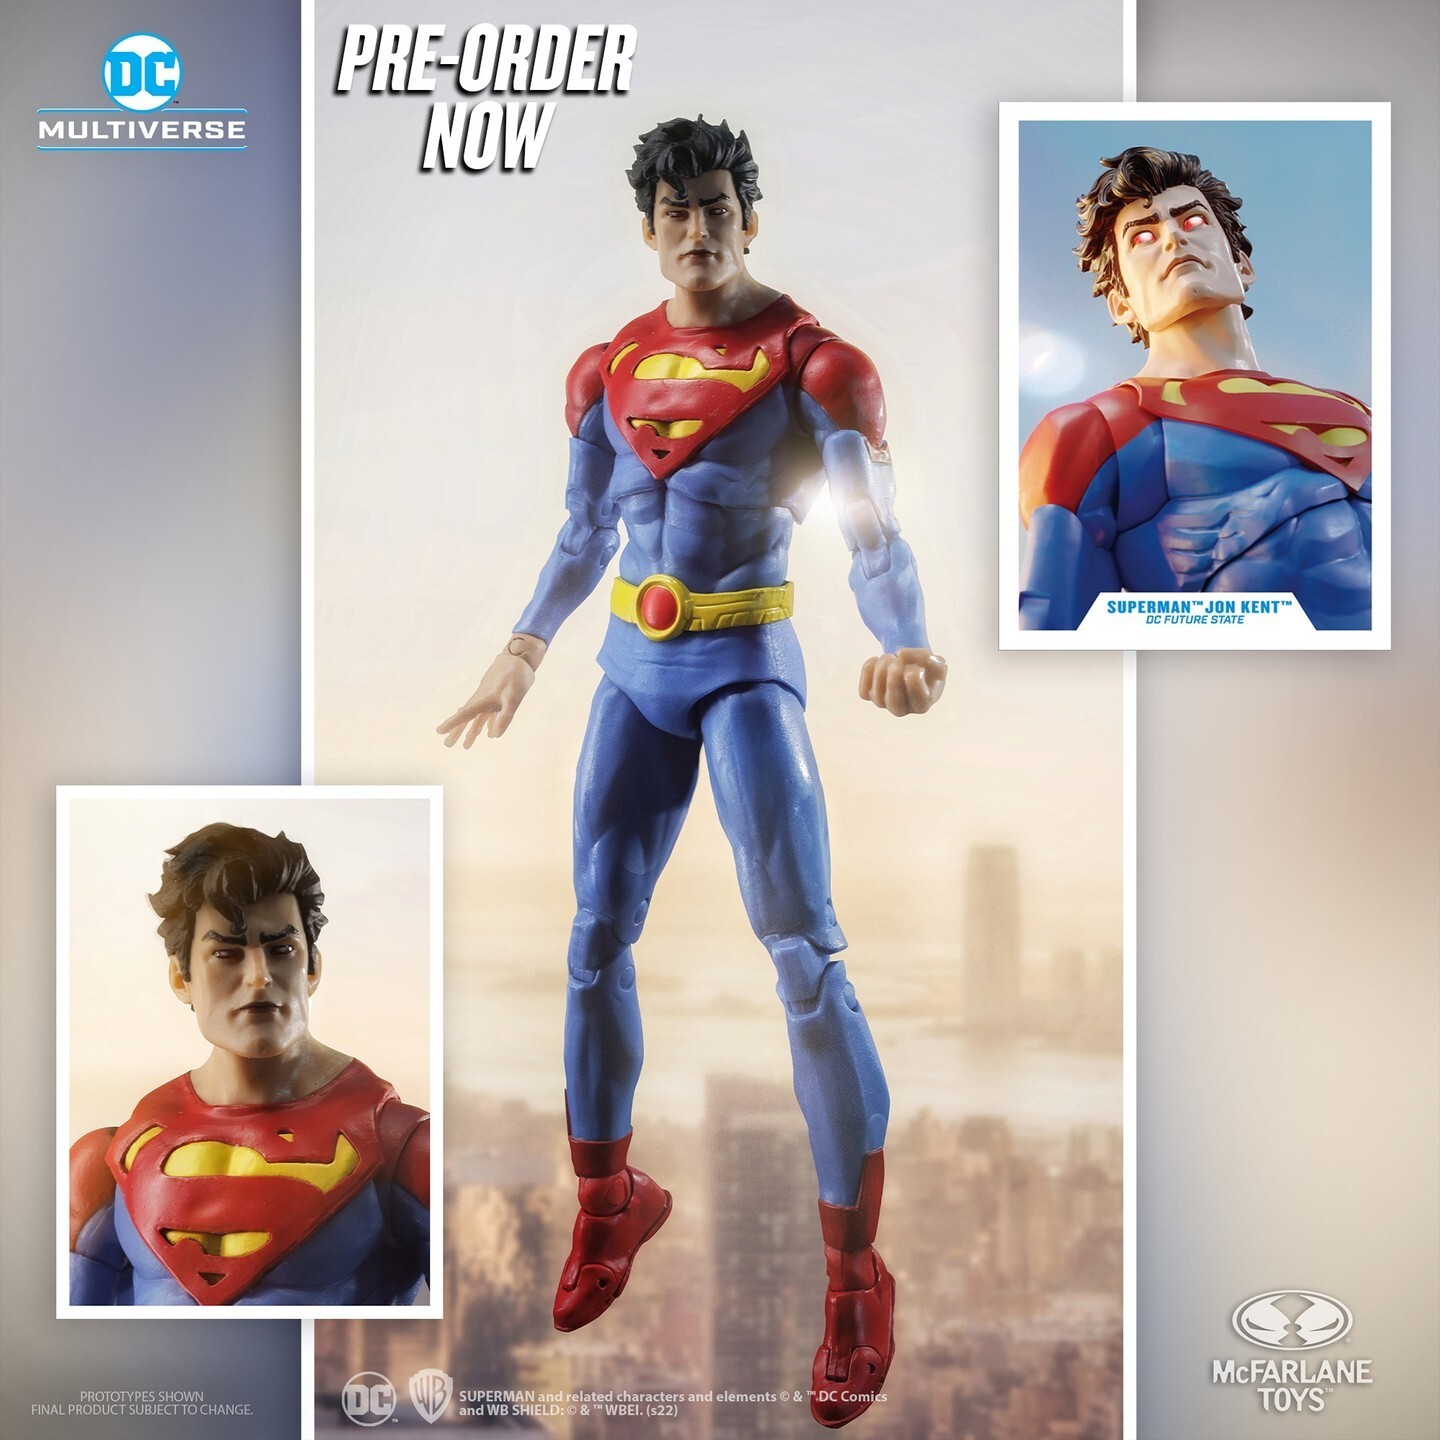 Jon Kent Superman - I helped with articulation engineering